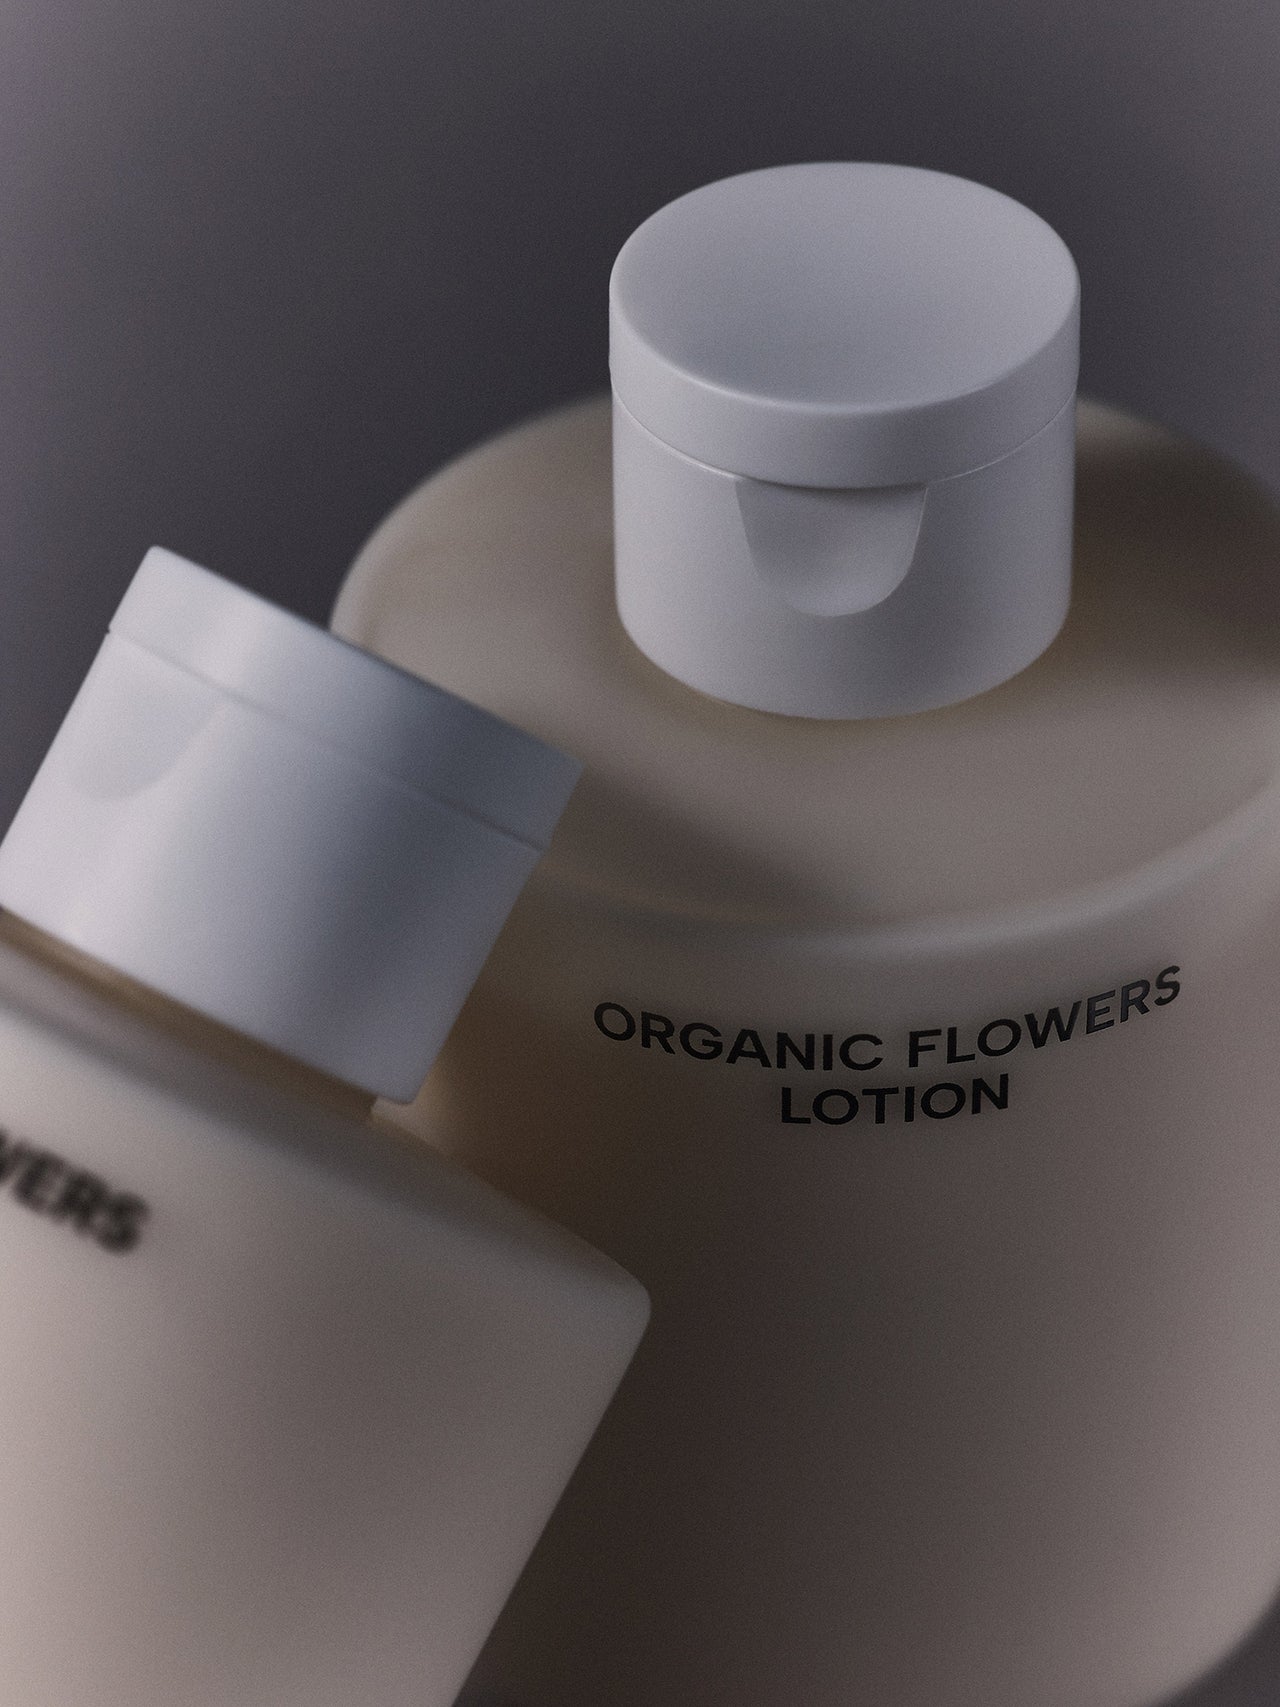 Organic Flowers Lotion Double Rich